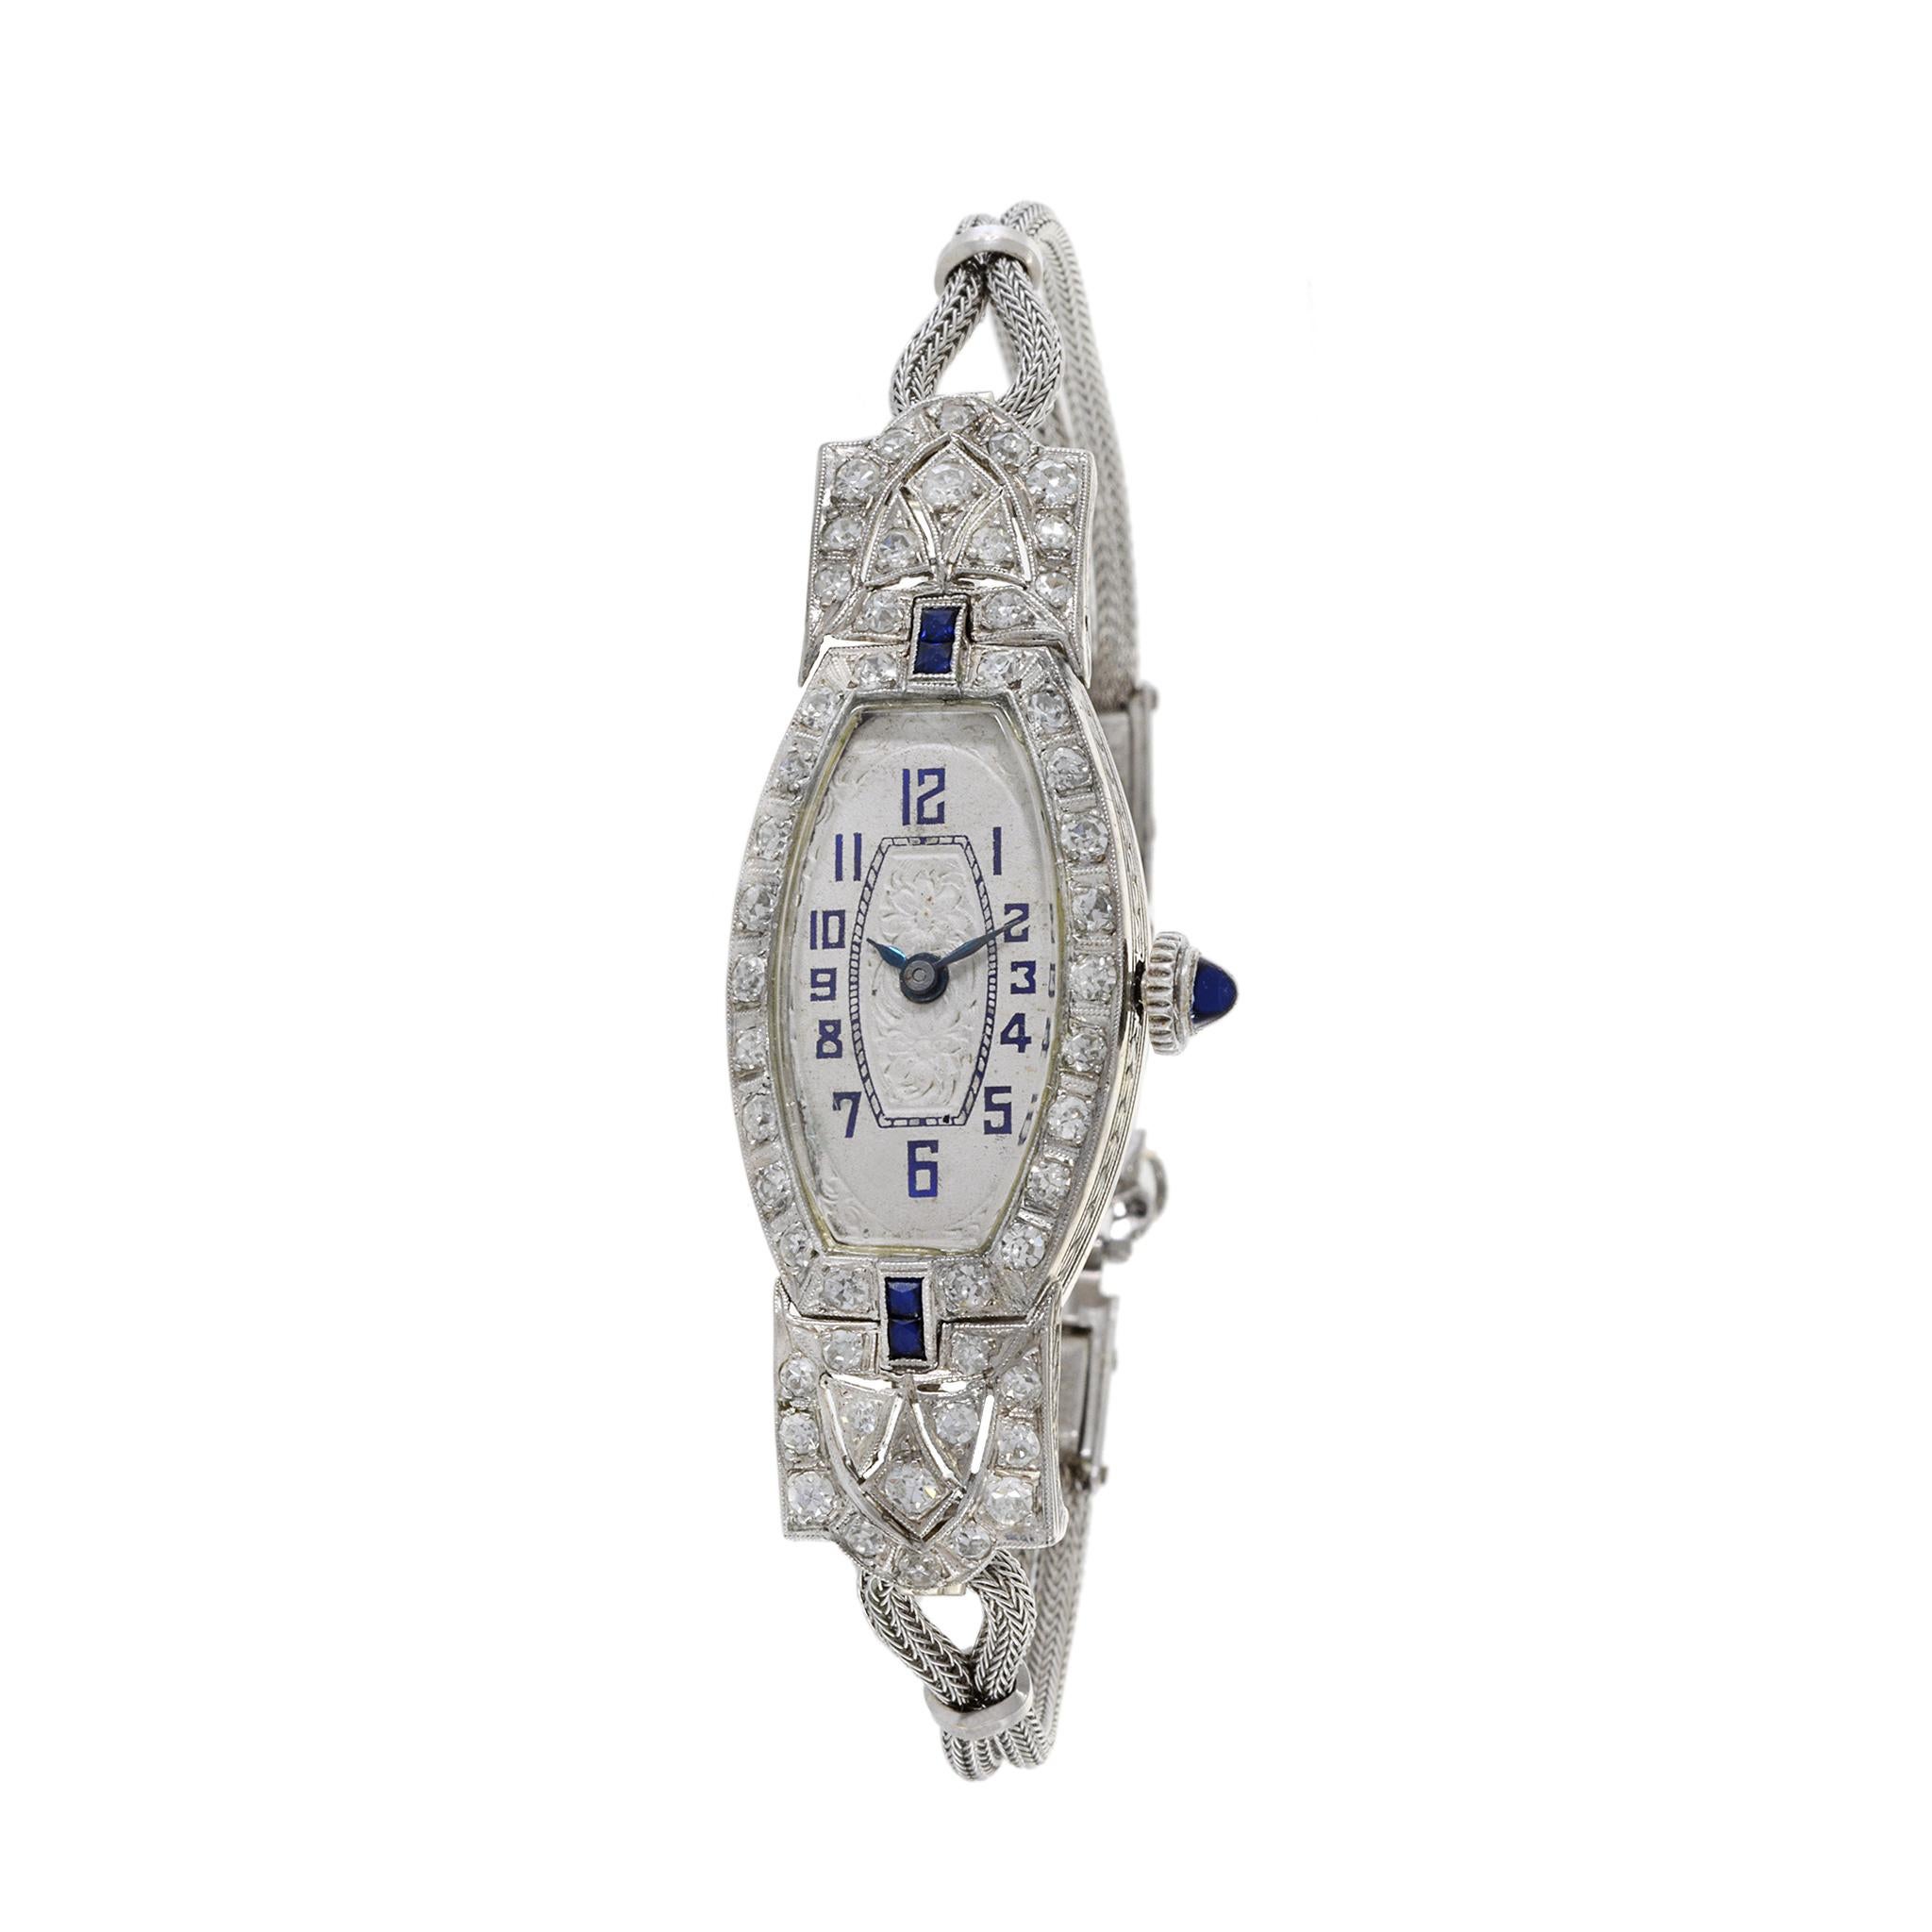 This is an elegant 1950's Platinum Cocktail watch with diamonds and sapphires. The watch has a total diamond weight of 1.50TDW. The watch is powered by a high grade Swiss 17 jewel movement. 

The case measures 18mm in diameter and 48mm lug to